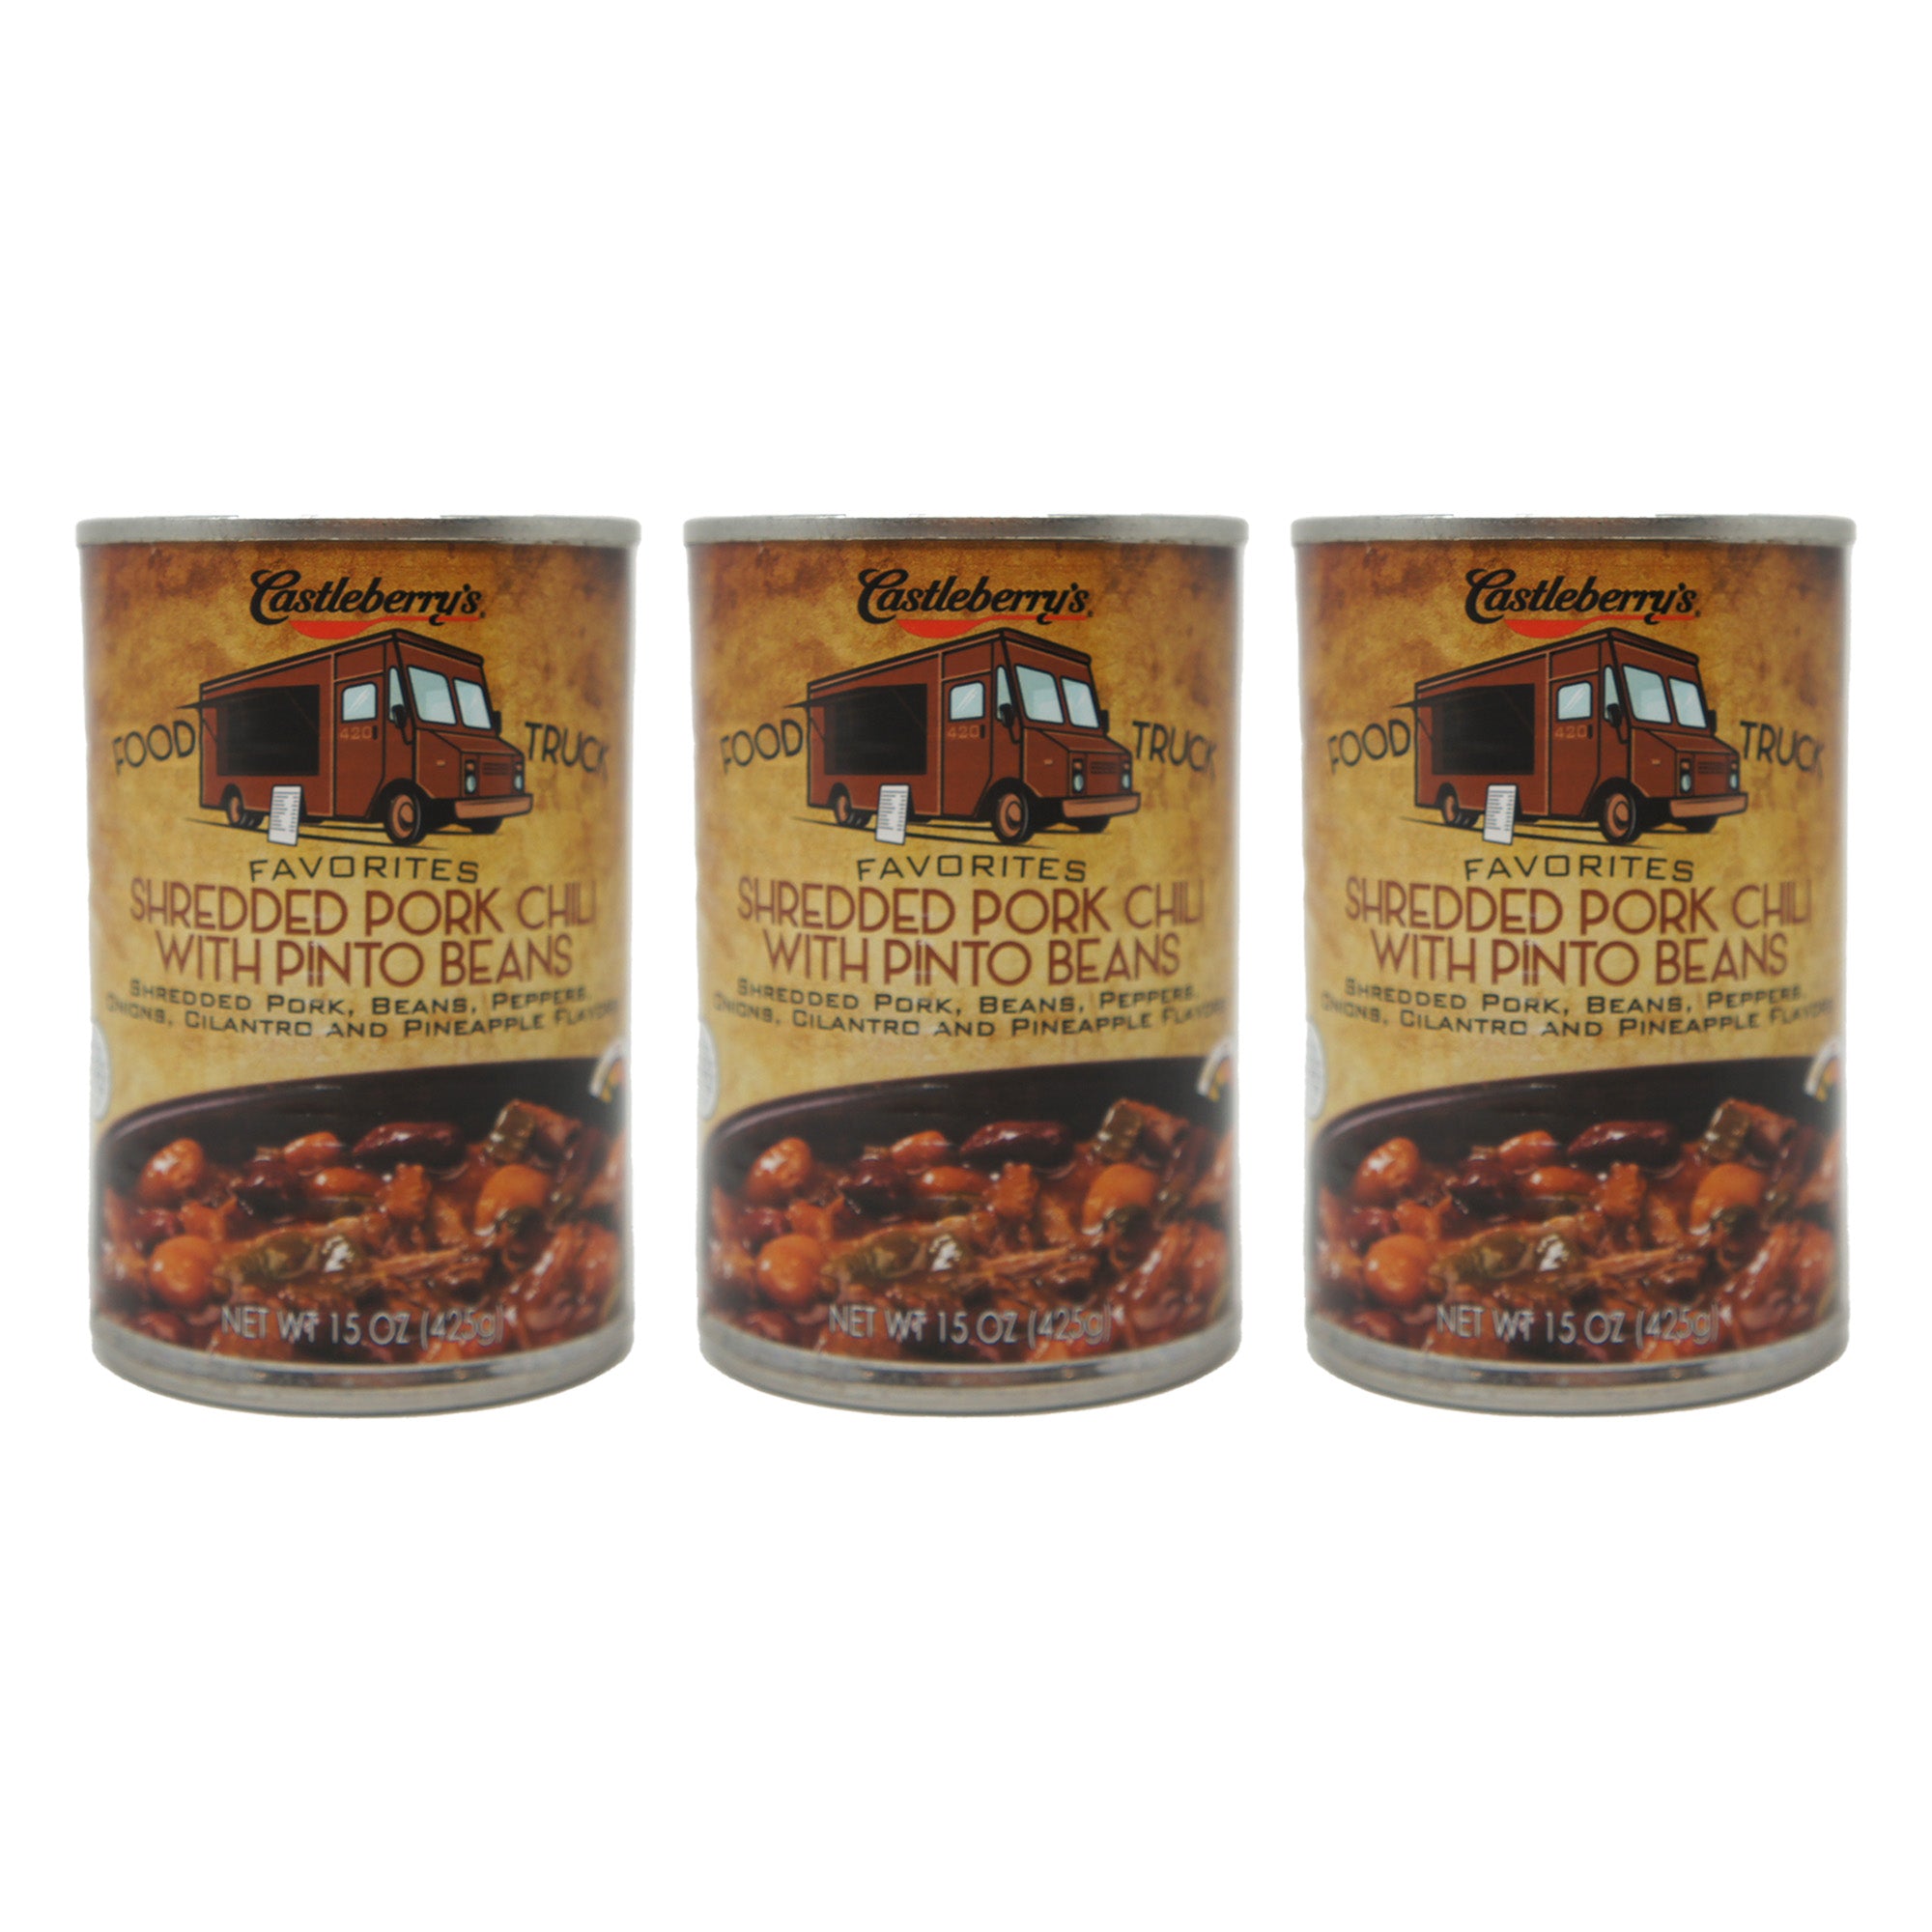 Castleberry's Food Truck Favorites, Shredded Pork Chili with Pinto Beans, 15 oz Cans (3 Pack)